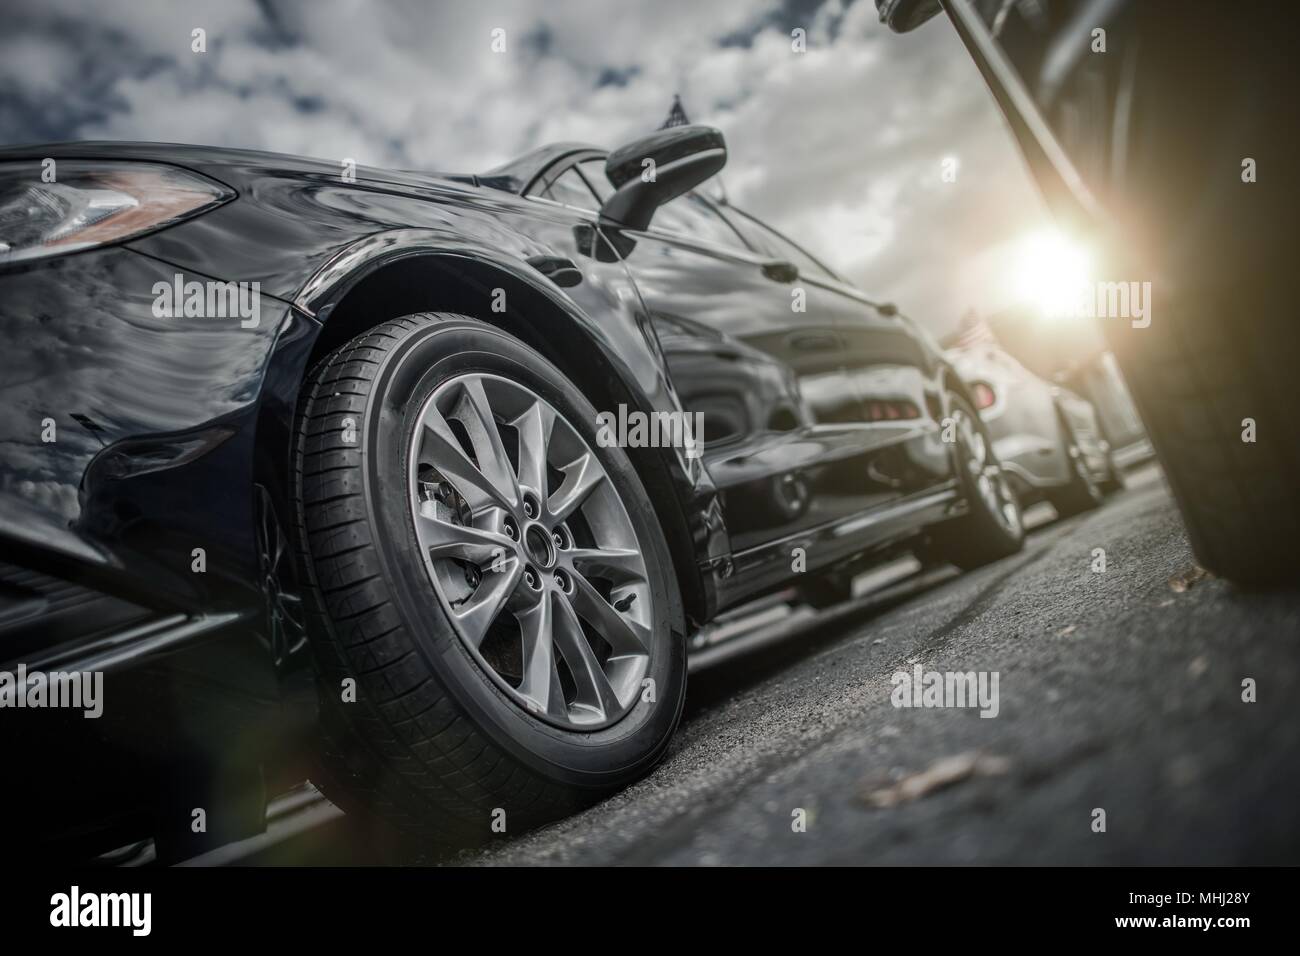 Full Cars Parking. Modern Vehicle Closeup from Low Ground Level. Stock Photo